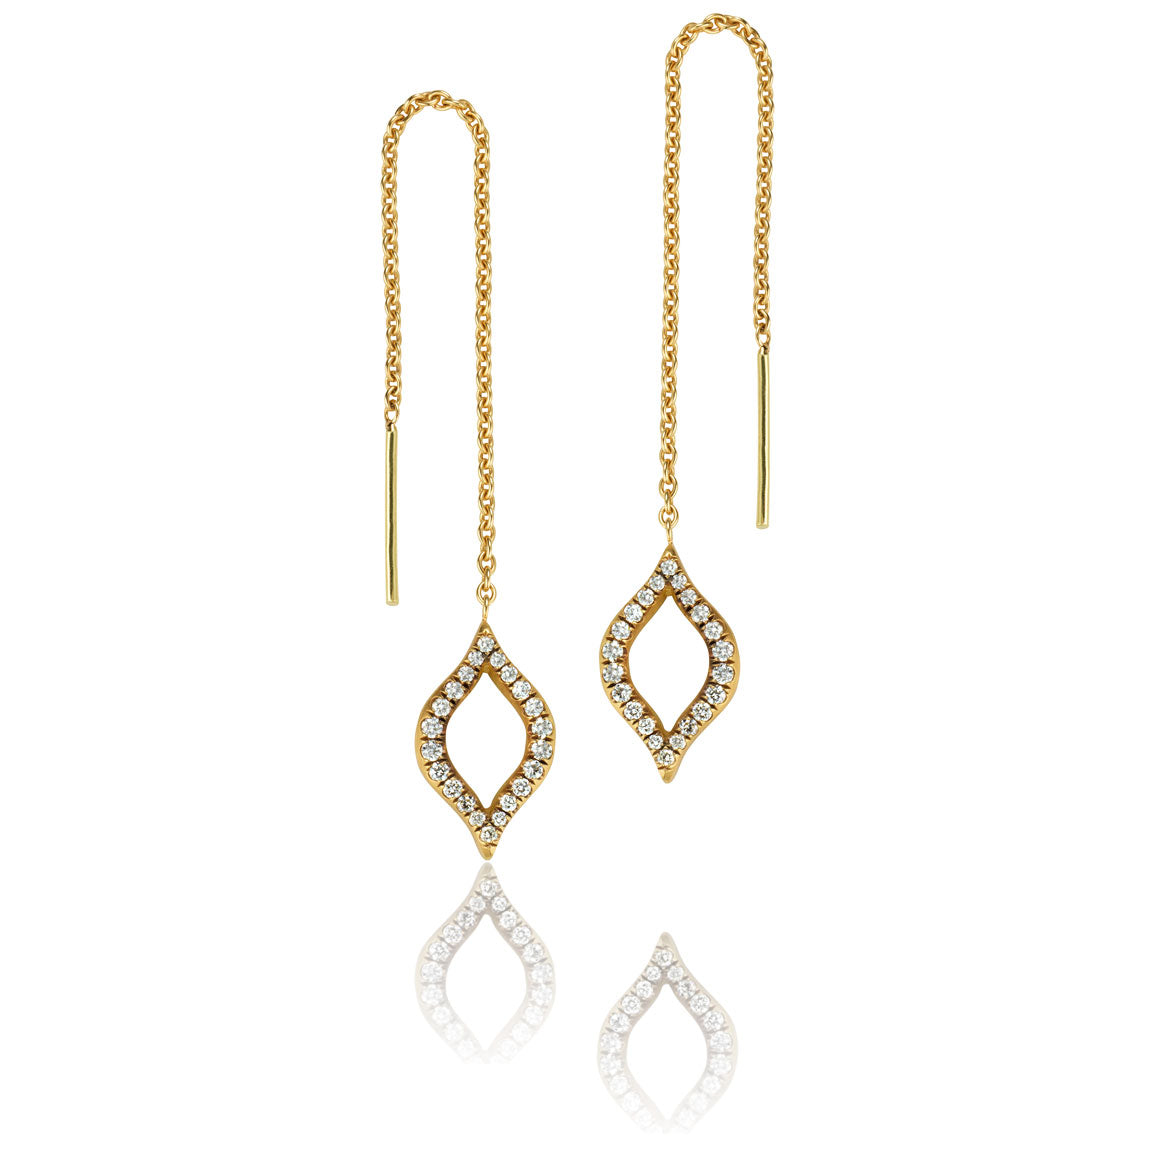 Elli gold earrings with white diamond pavé on drop chain